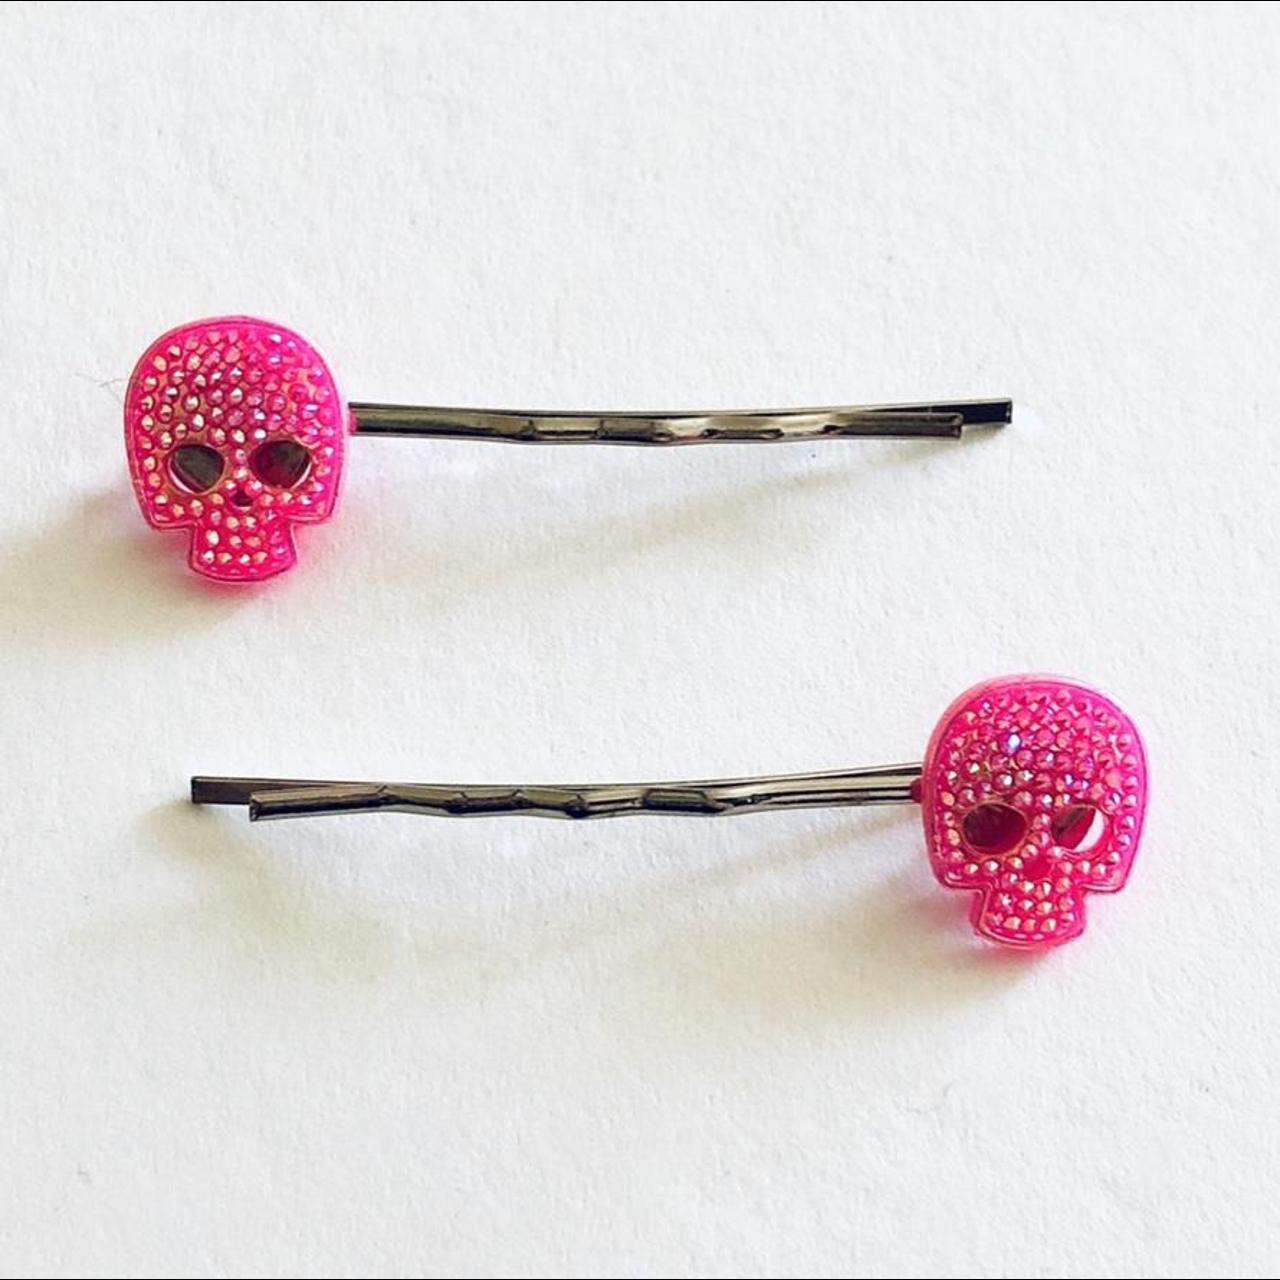 Women's Silver and Pink Hair-accessories (3)